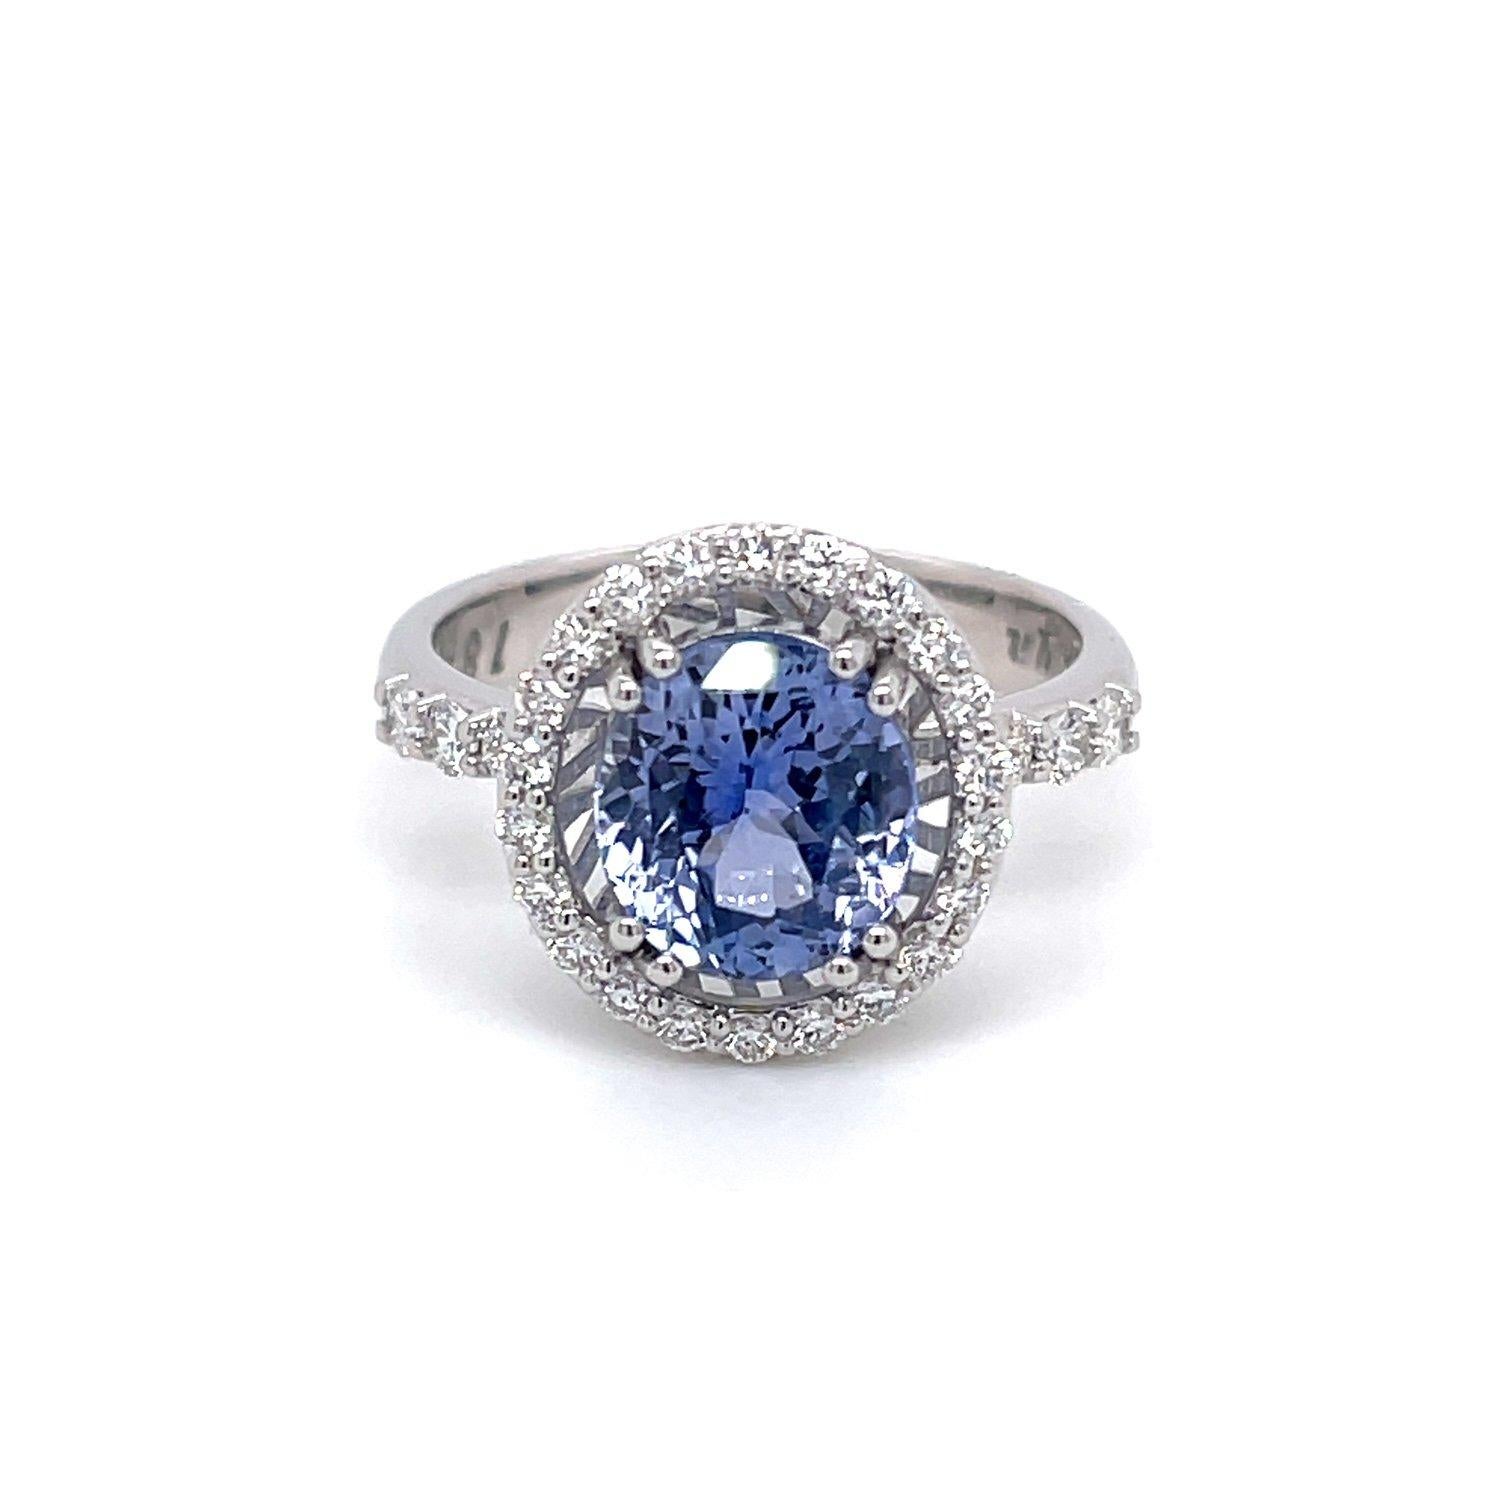 An 18k white gold ring set with one oval 2.95 carat pastel blue sapphire, untreated from Sri Lanka, and .4 carats of white FVS diamonds. This ring was made and designed by llyn strong.